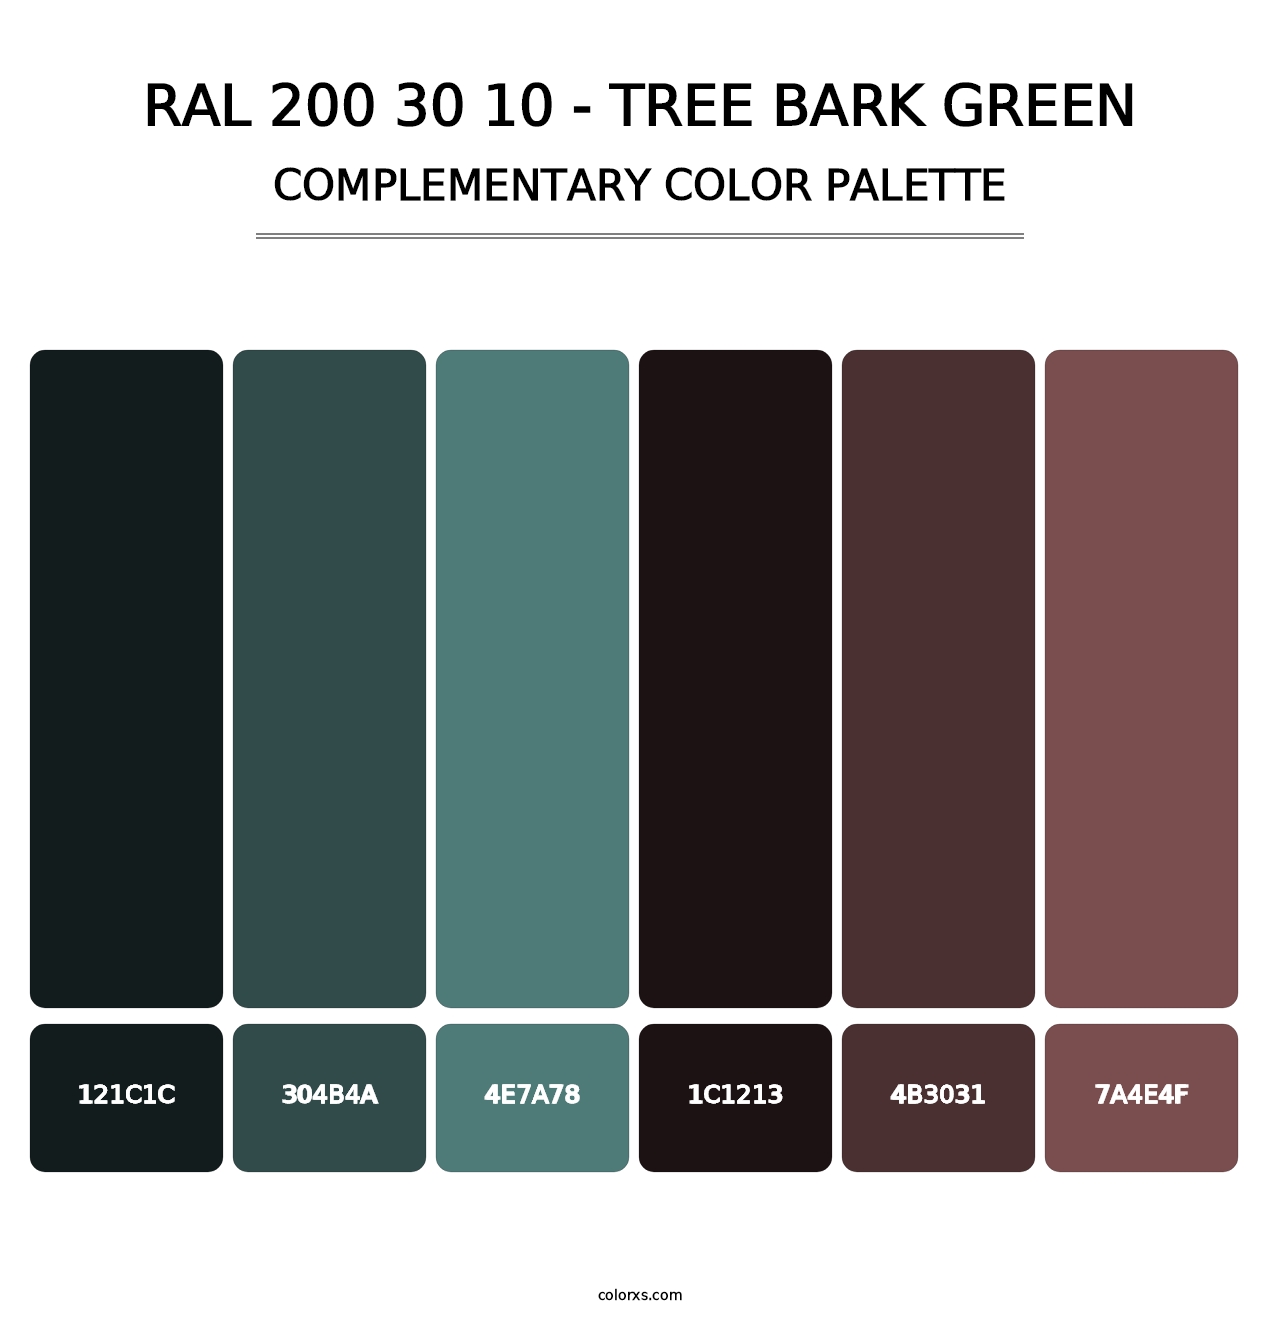 RAL 200 30 10 - Tree Bark Green - Complementary Color Palette